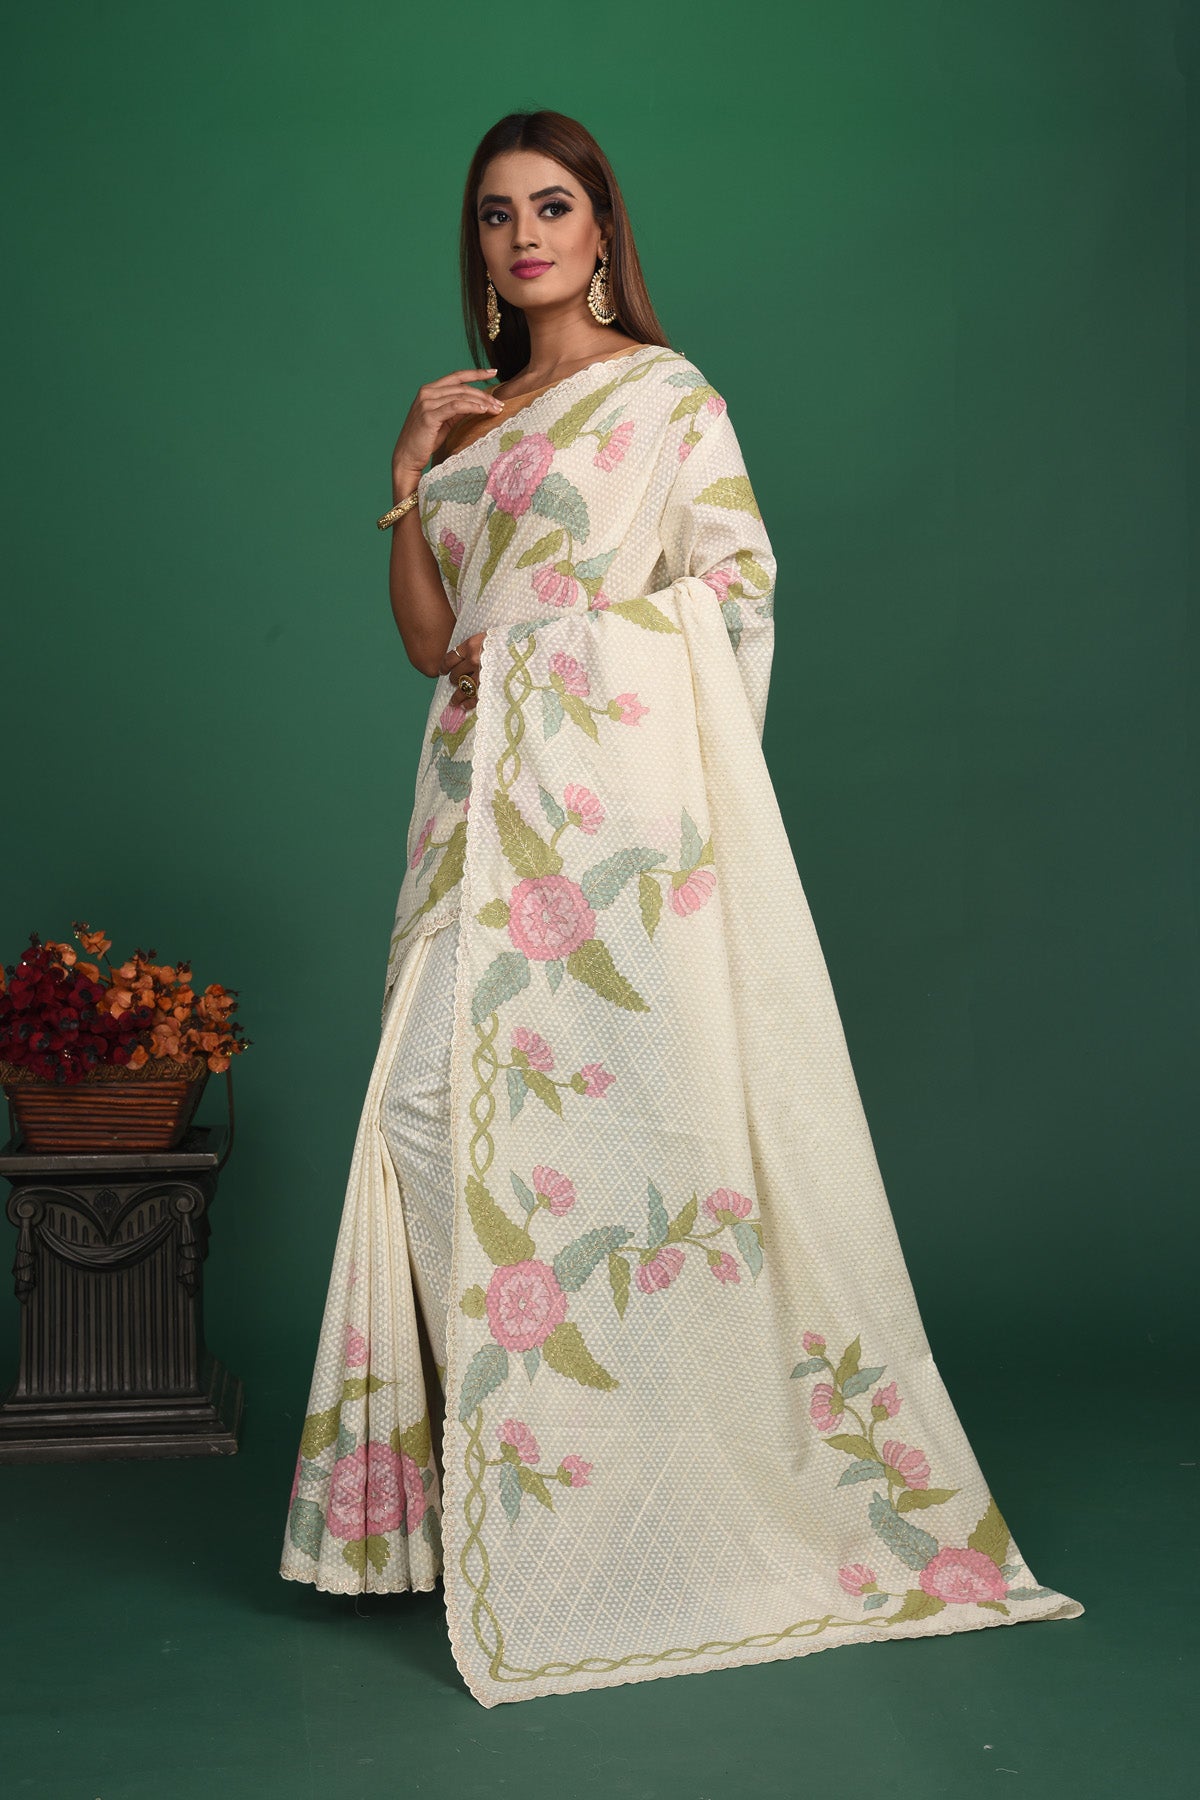 Elegance in simplicity! Our Rigel White Mulmul Saree is an epitome of beauty with its calm and soothing color and sheen texture. This saree is crafted in mulmul cotton that hugs you for effortless and comfortable styling. Style this up with jewelry pieces from our Dhatu collection for a simple and stylish look. Shop this designer saree from Pure Elegance Indian Fashion Store Online in USA.-Side view with open pallu.